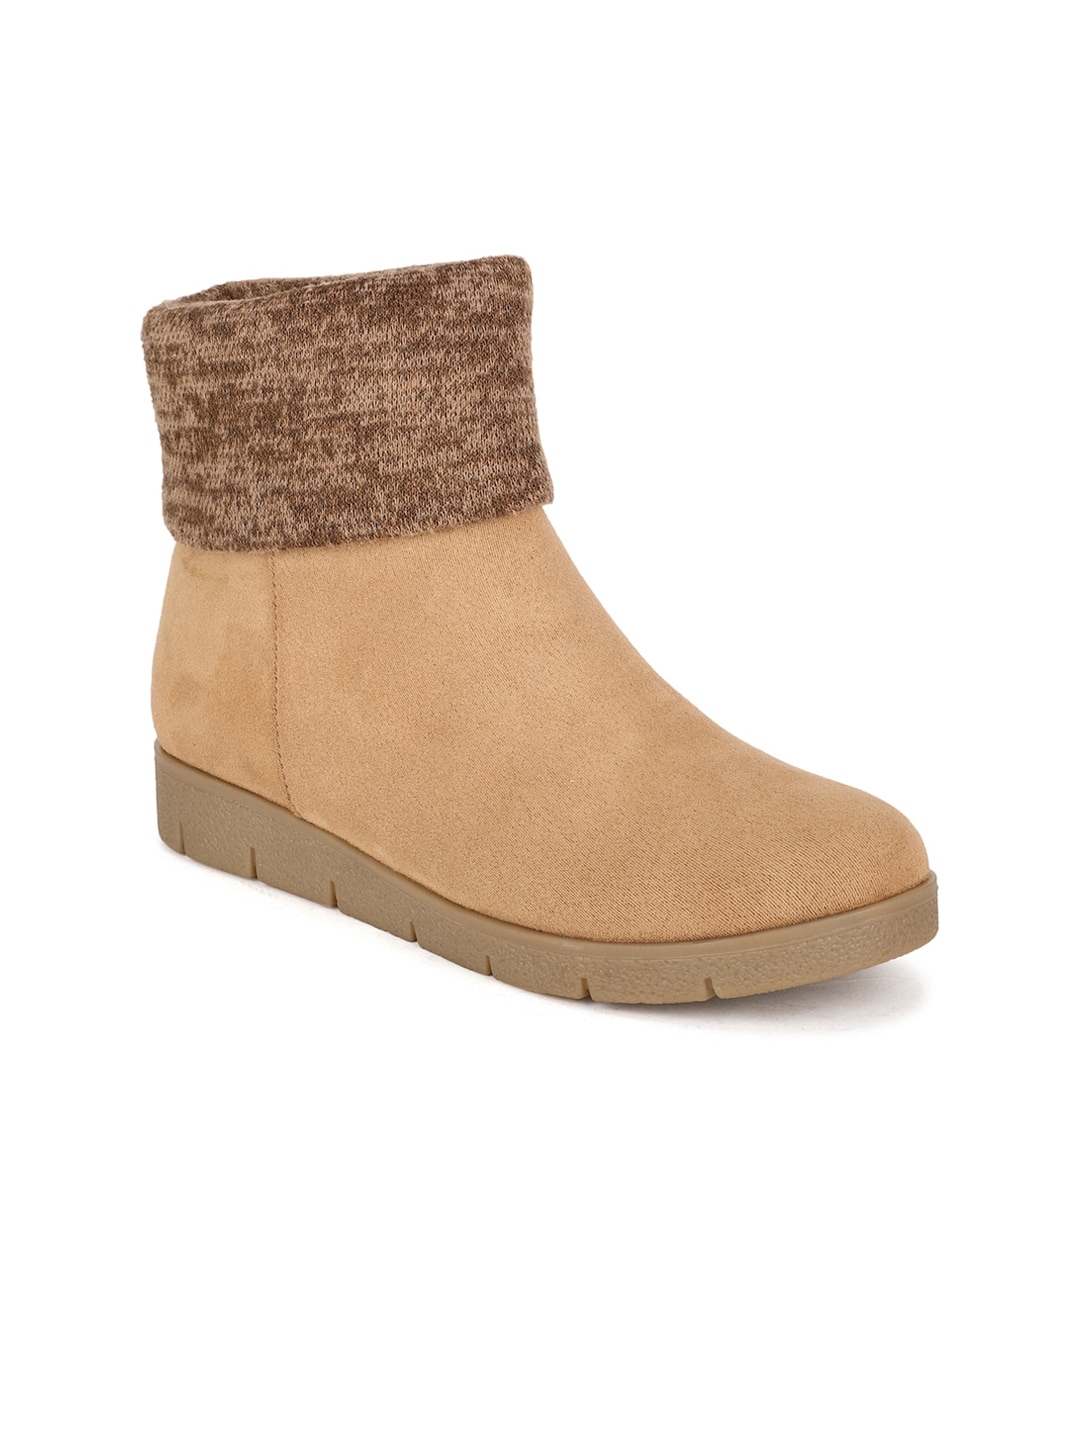 Bruno Manetti Beige Suede Wedge High-Top Heeled Boots Price in India